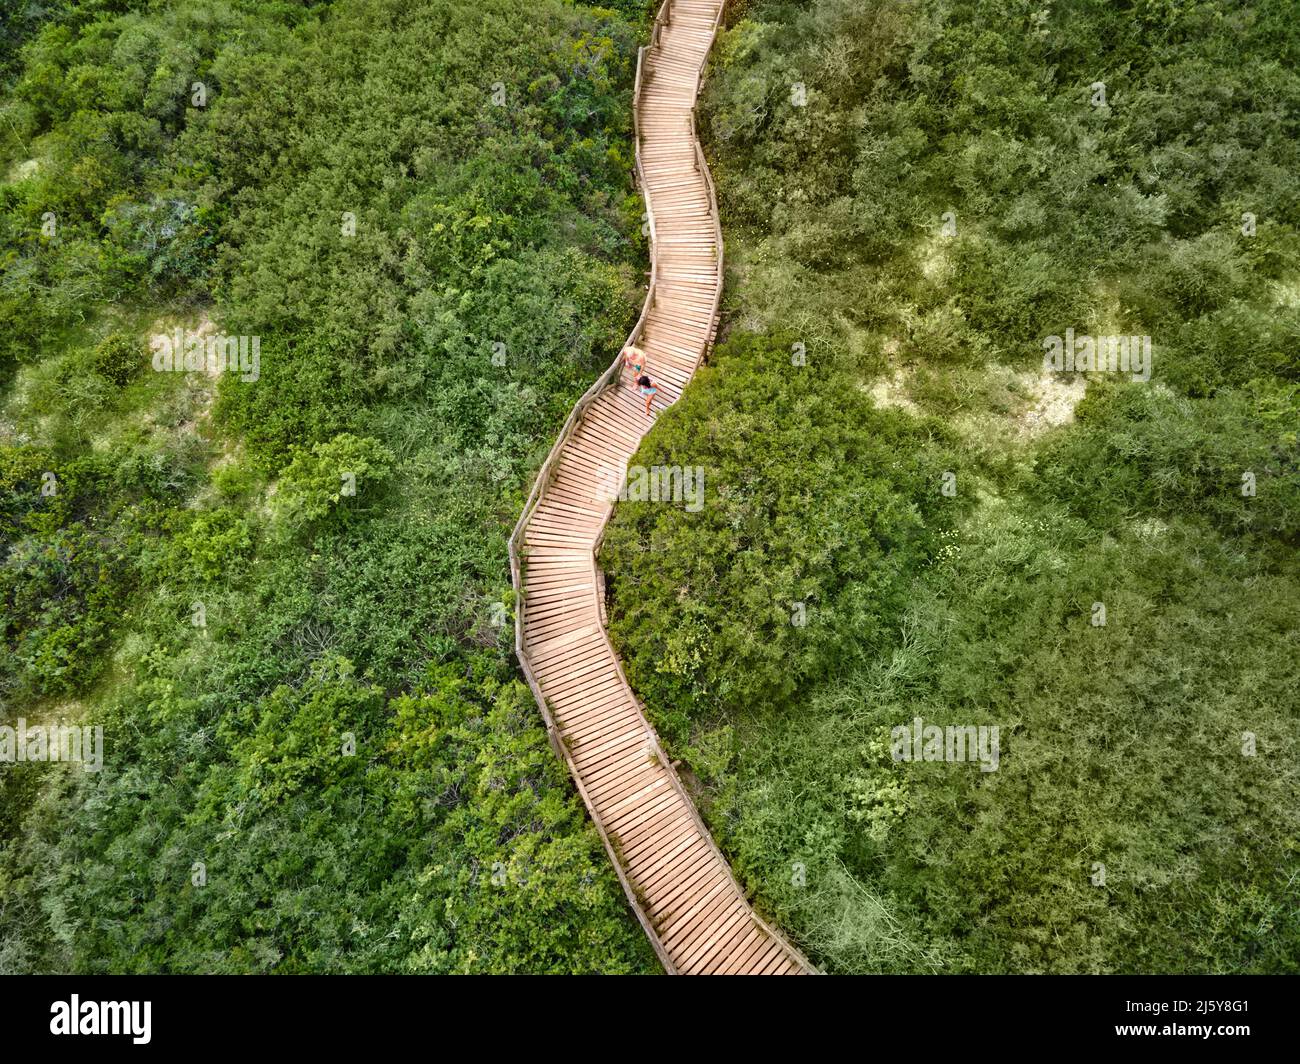 Aerial view couple walking on wooden boardwalk among green trees Stock Photo